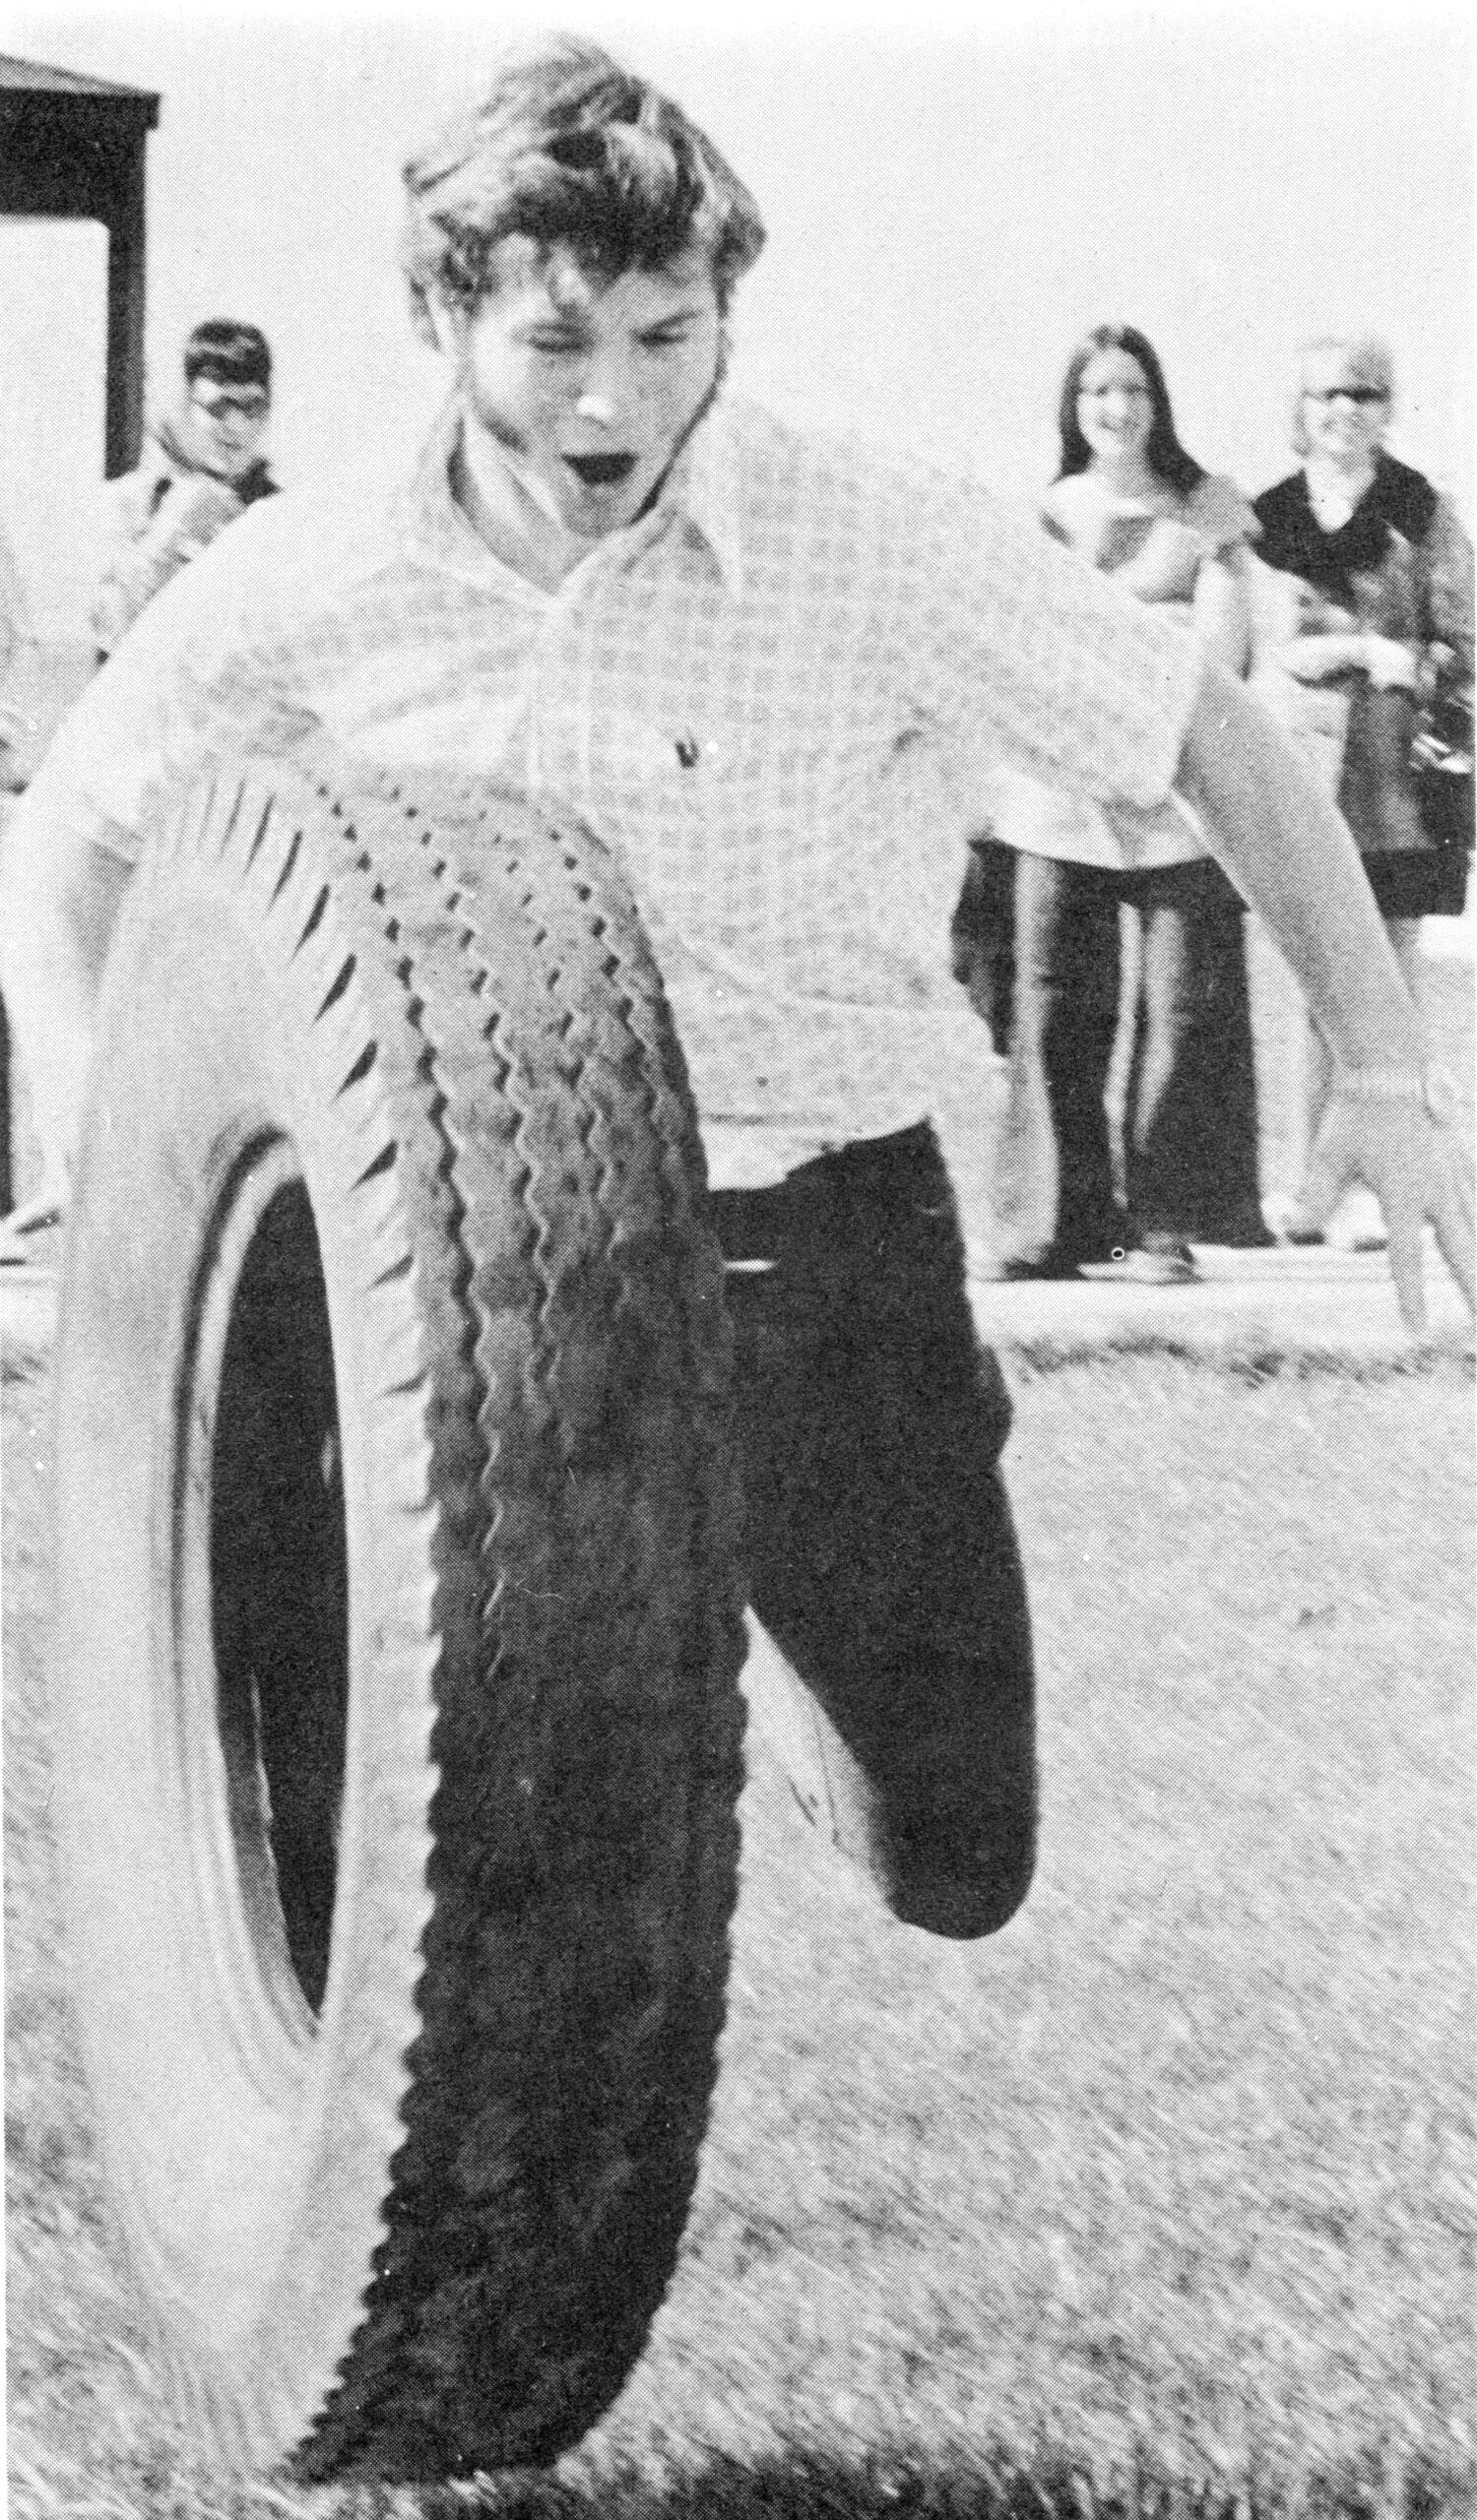 A tire-rolling contest was one of the new events for Spring Fling 1973. [College Archives]